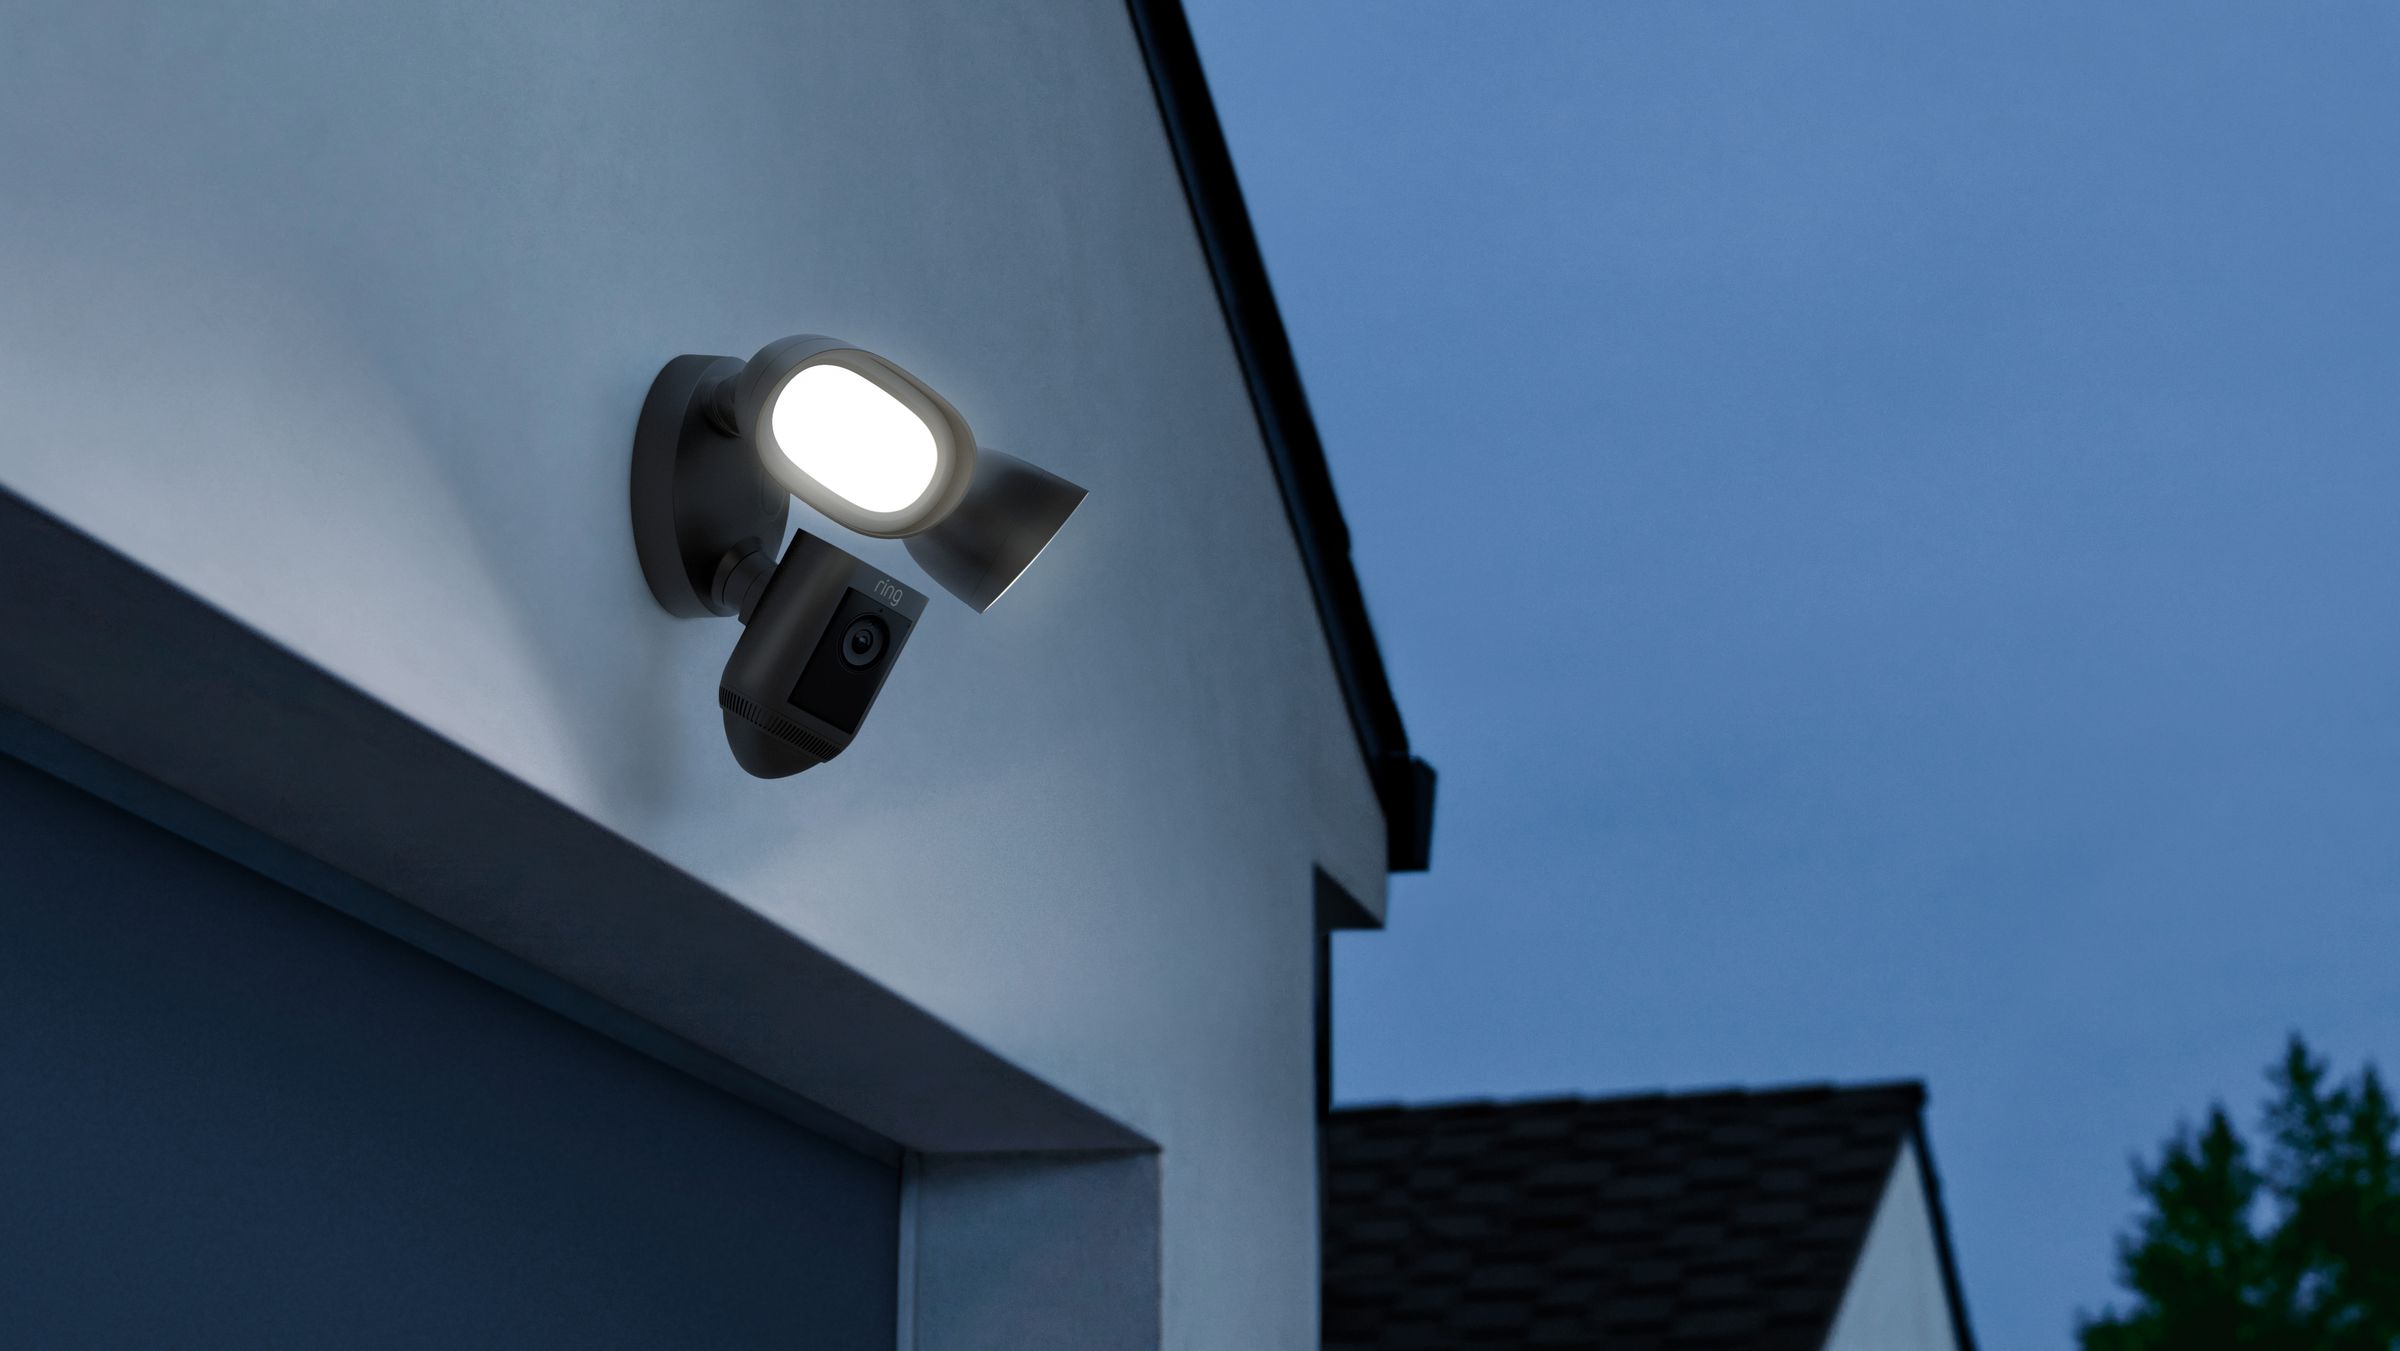 The Floodlight Cam Wired Pro is available in either white or black color options